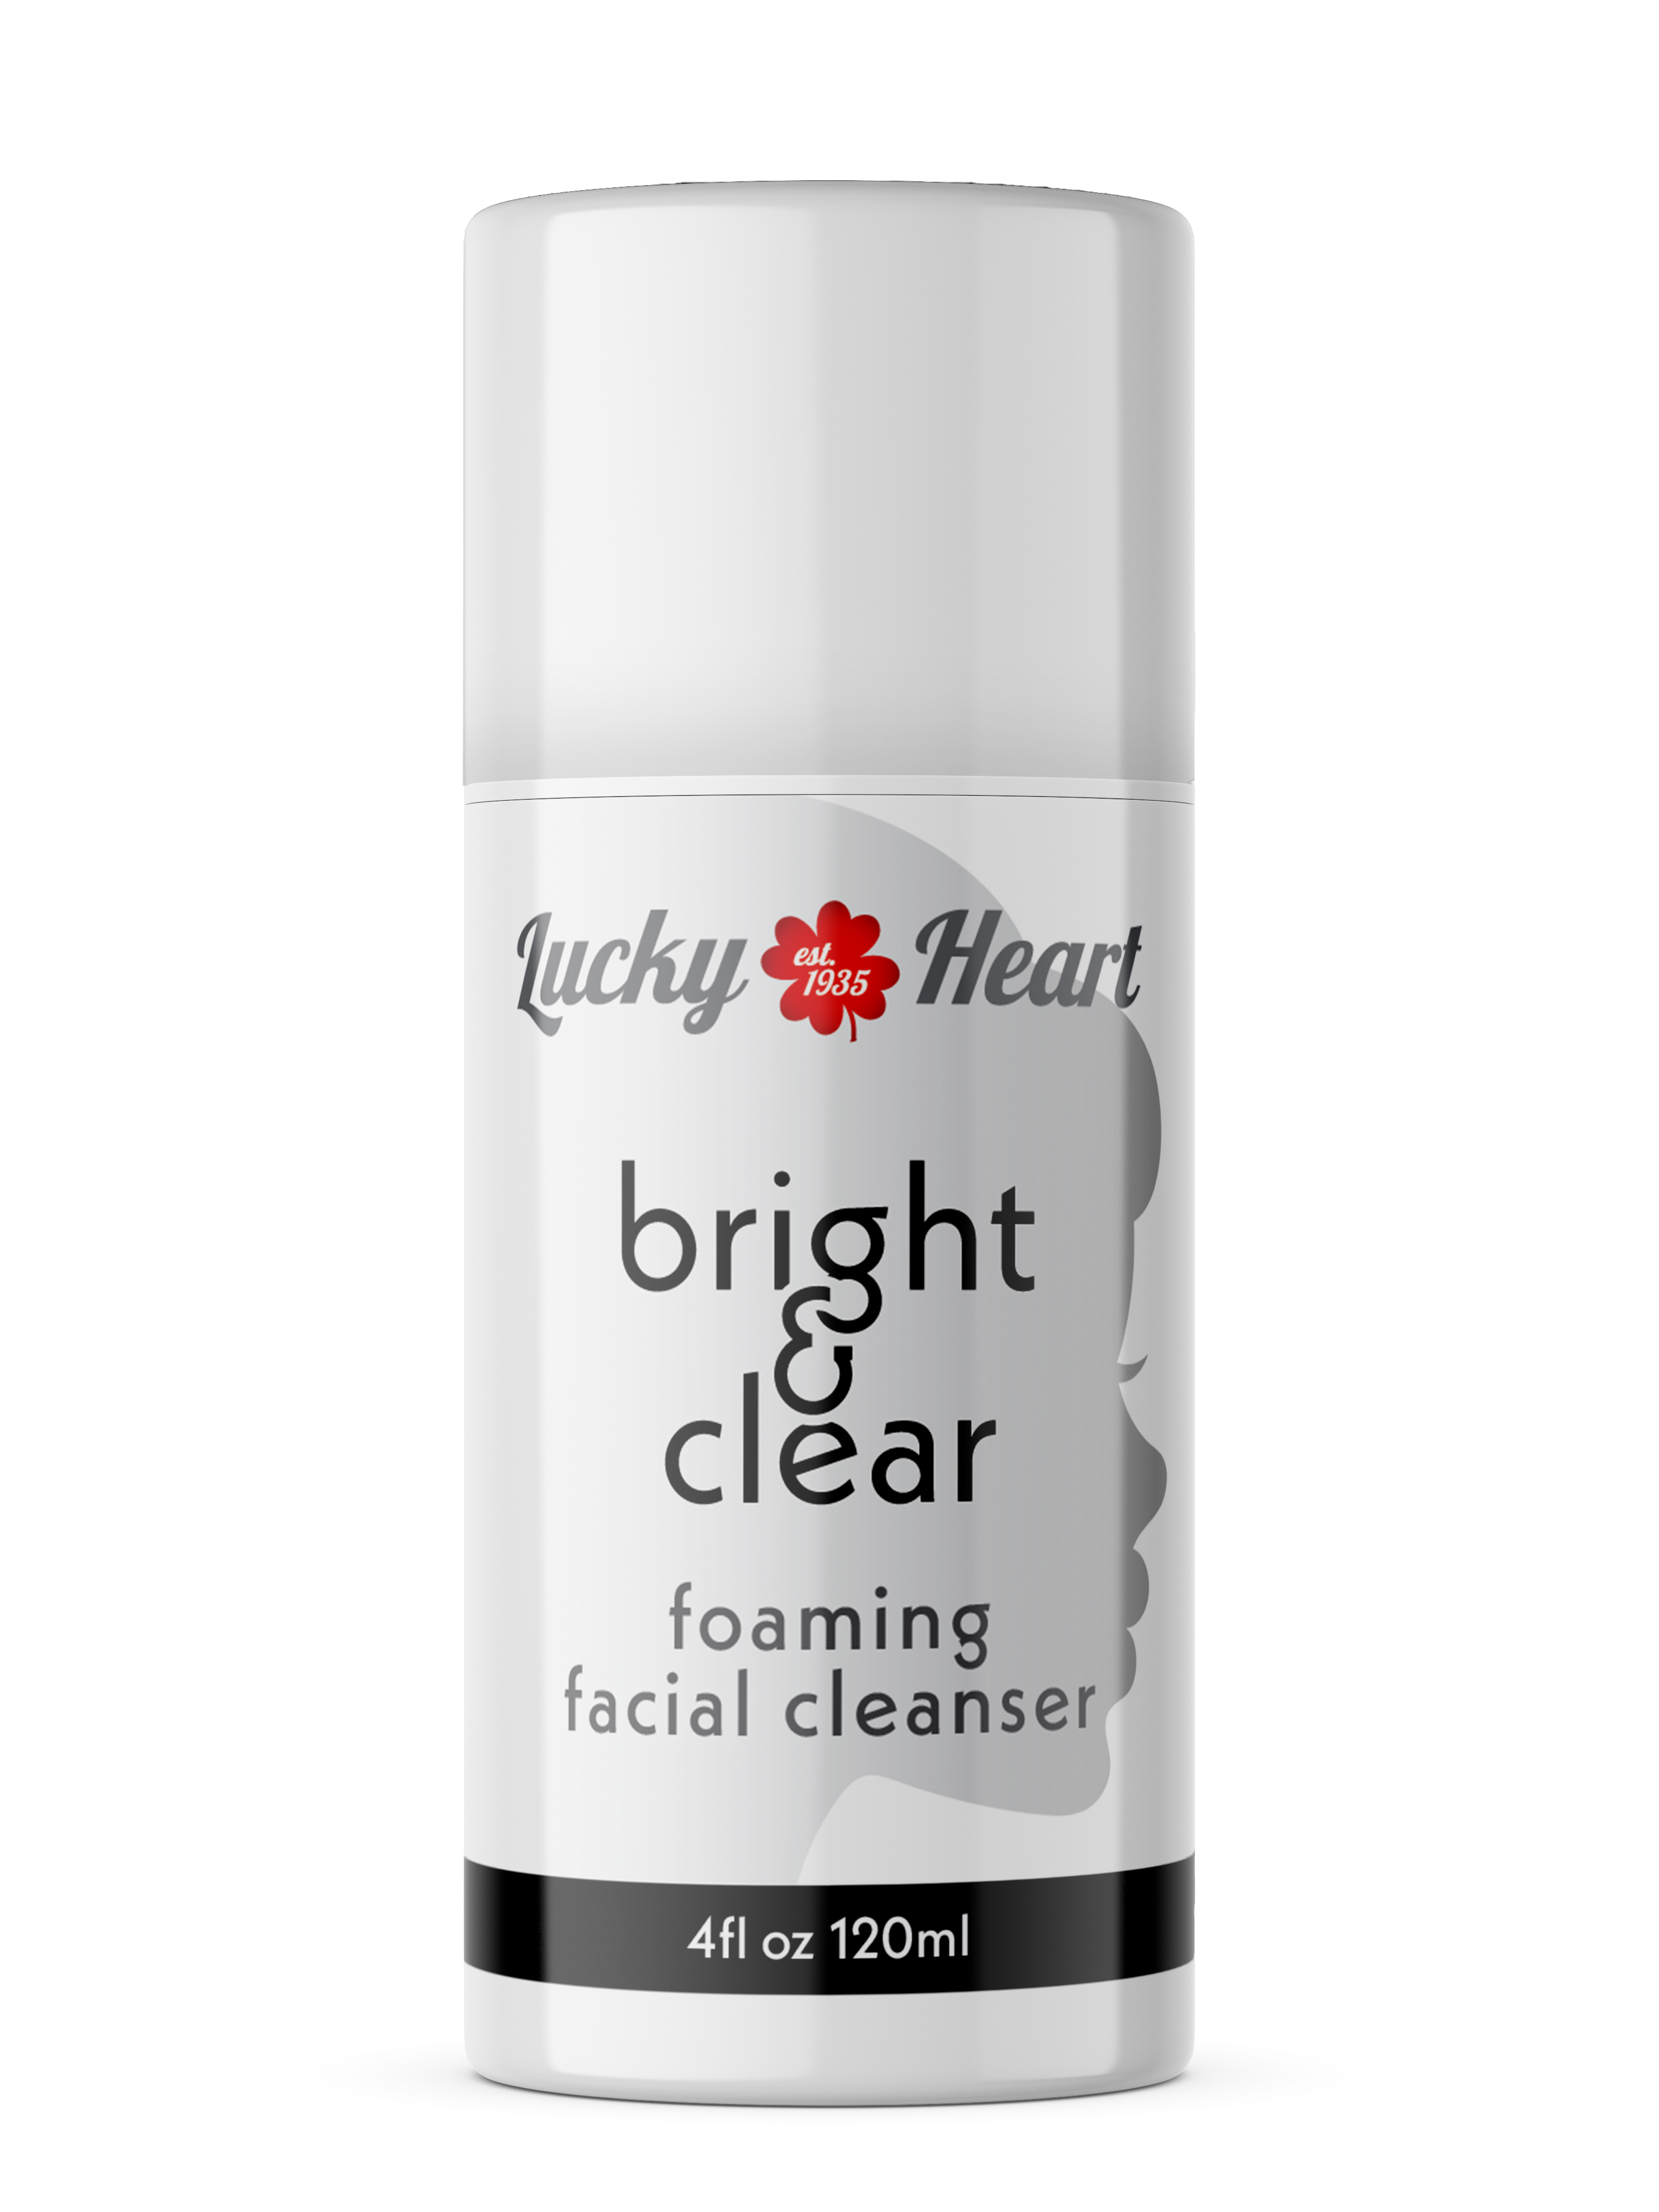 Bright & Clear Foaming Facial Cleanser